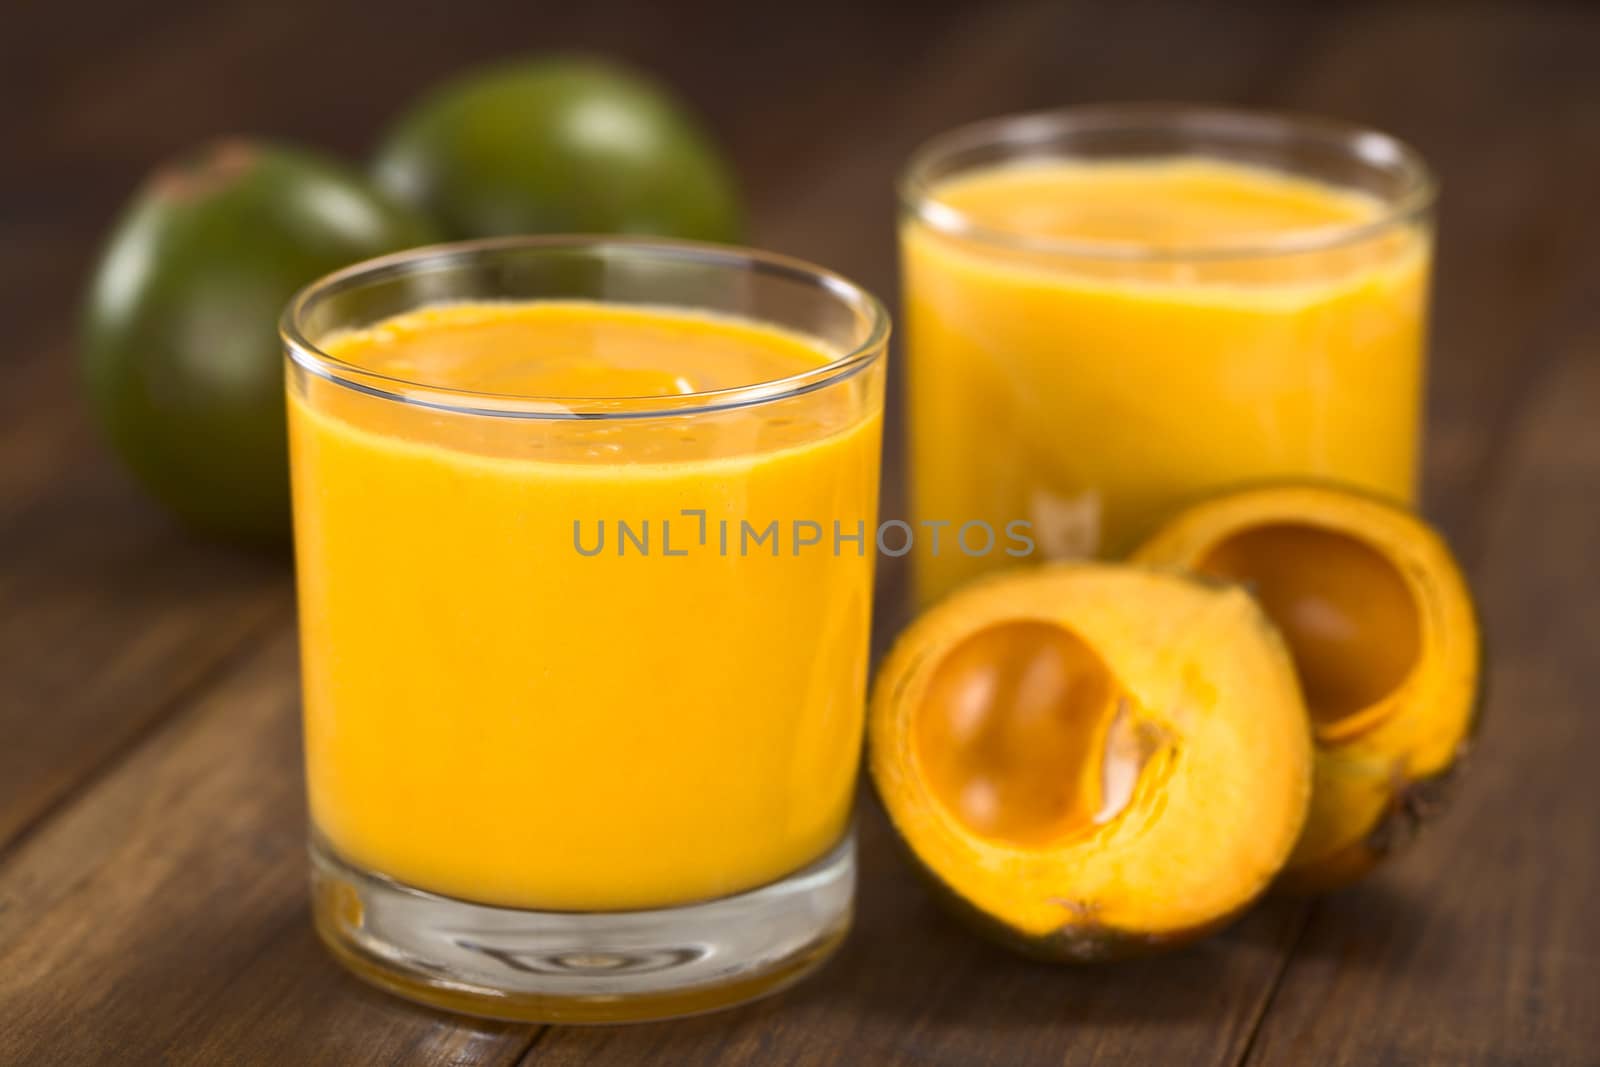 Milkshake made of the Peruvian fruit called lucuma (lat. Pouteria lucuma) served in glass with lucuma fruits around (Selective Focus, Focus on the front of the glass rim) 